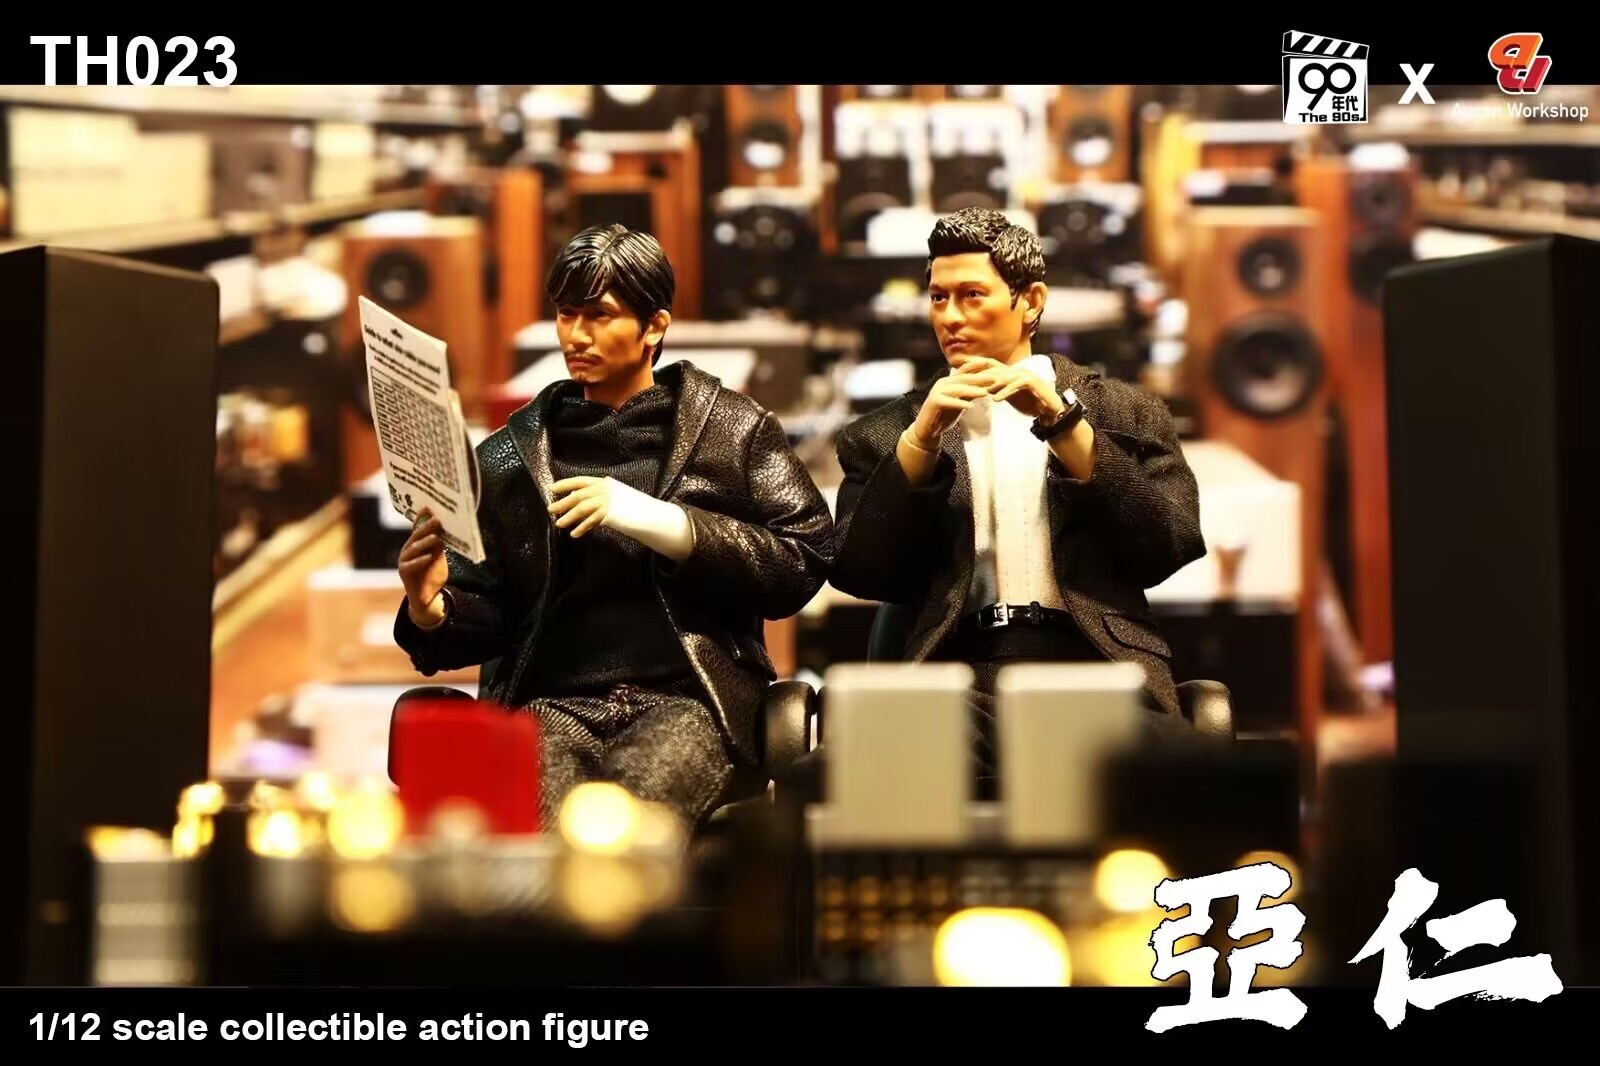 Diorama - NEW PRODUCT: 90's x Ausan 1/12 Aren, Liu SIR #TH023/TH024, classic audition room scene AS009 05138